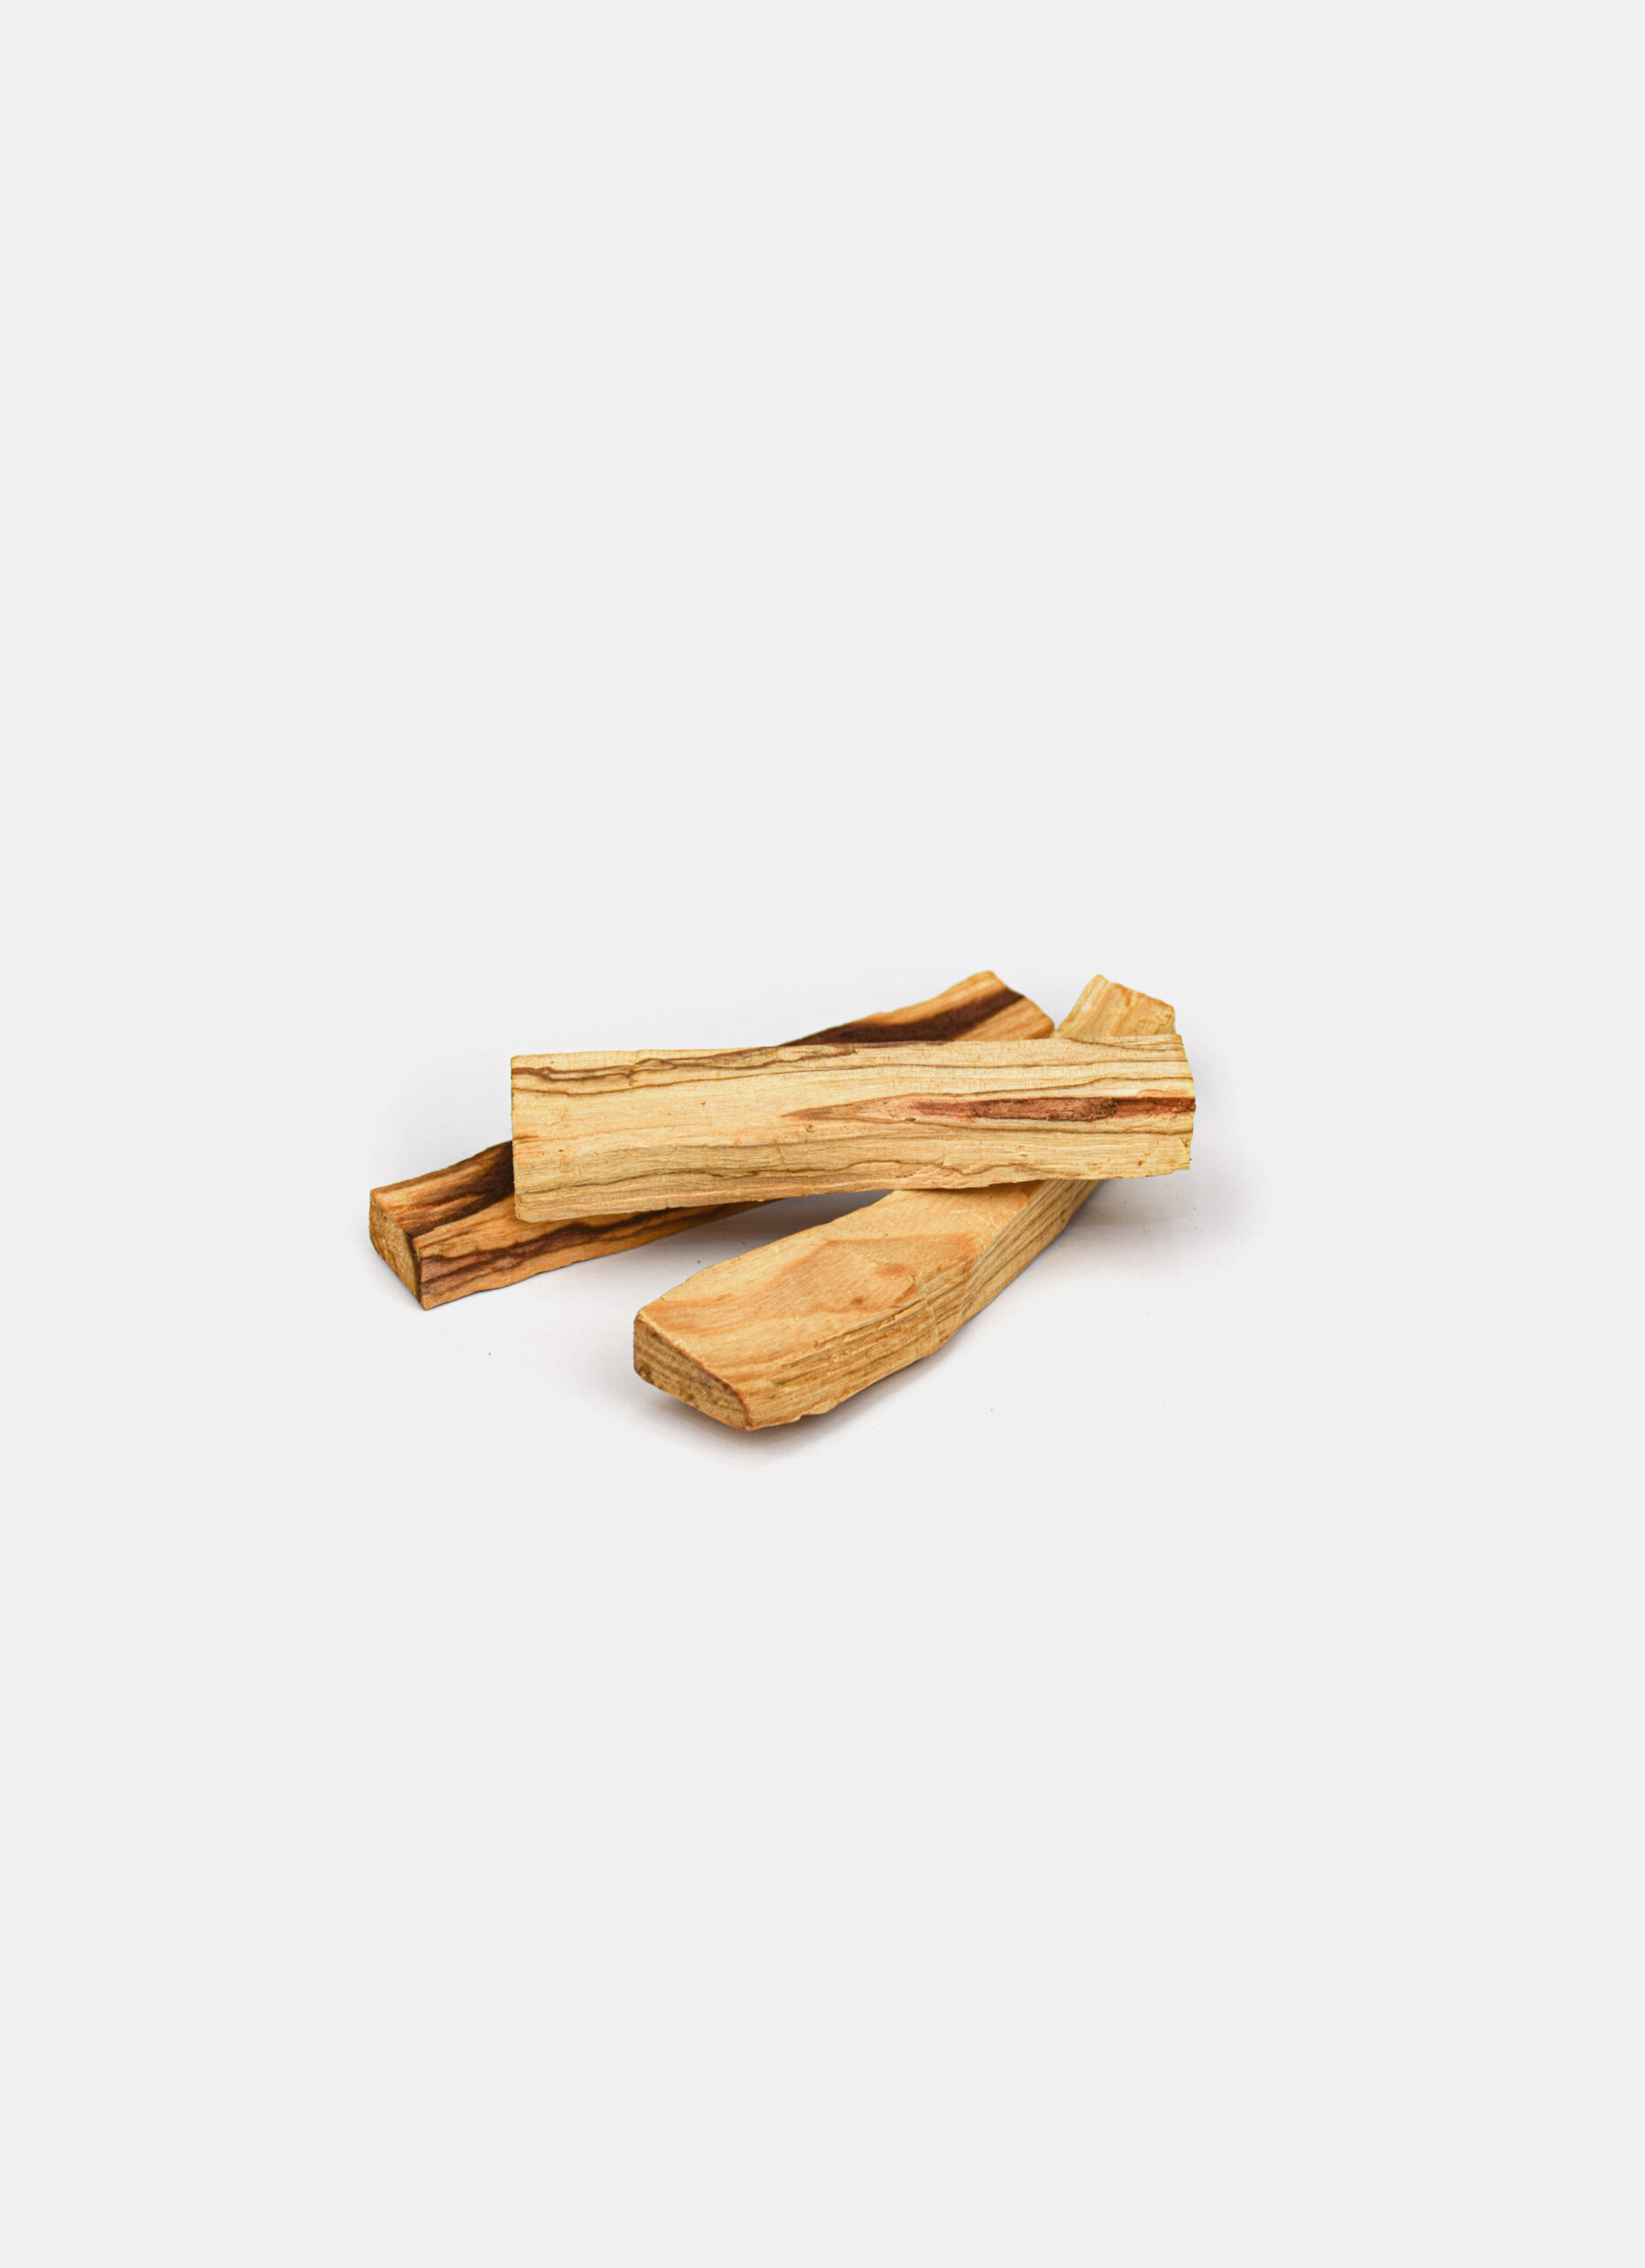 Incausa - Certified Responsive and Faire Trade - High Resin Palo Santo Wood Stick - 10 to 15cm